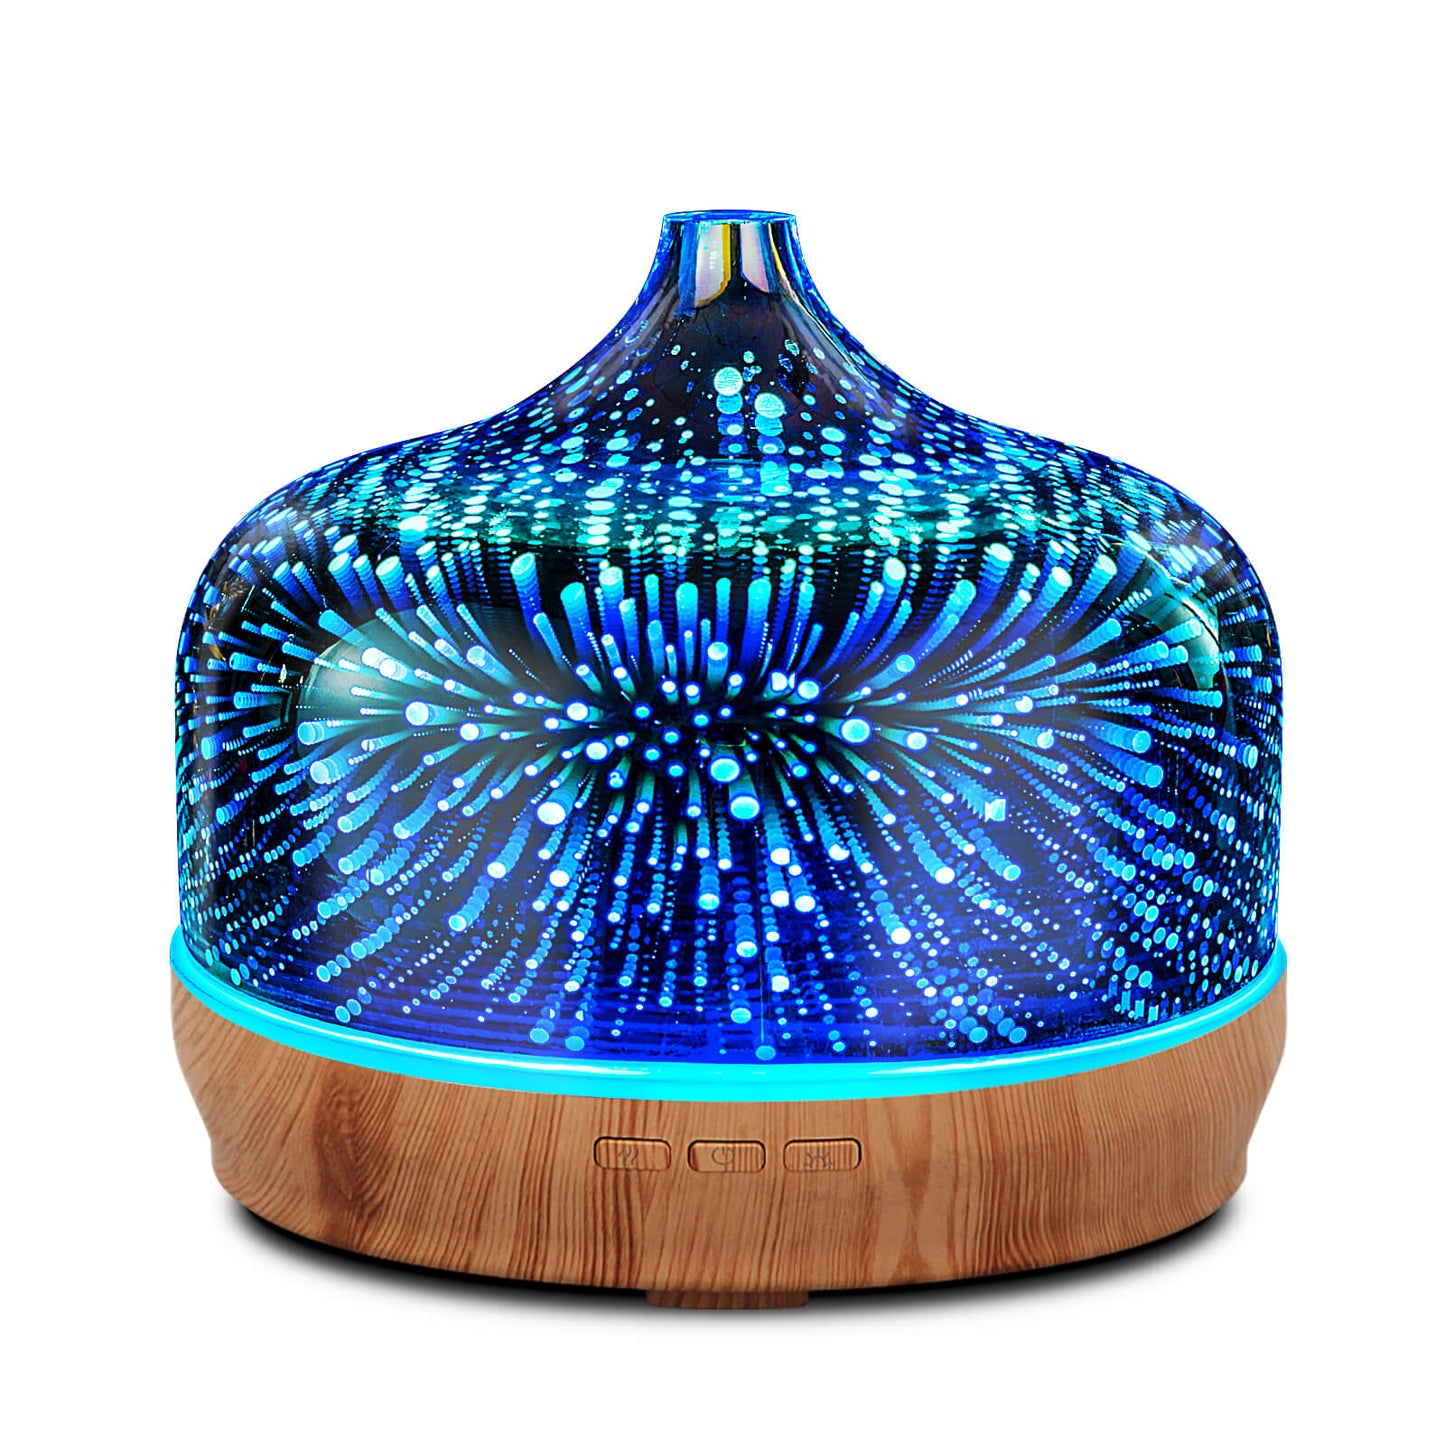 Porseme Essential Oil Diffuser 3D Glass Aromatherapy Ultrasonic Humidifier,  Air Refresh Auto Shut-Off, Timer Setting, BPA Free for Home Hotel Yoga